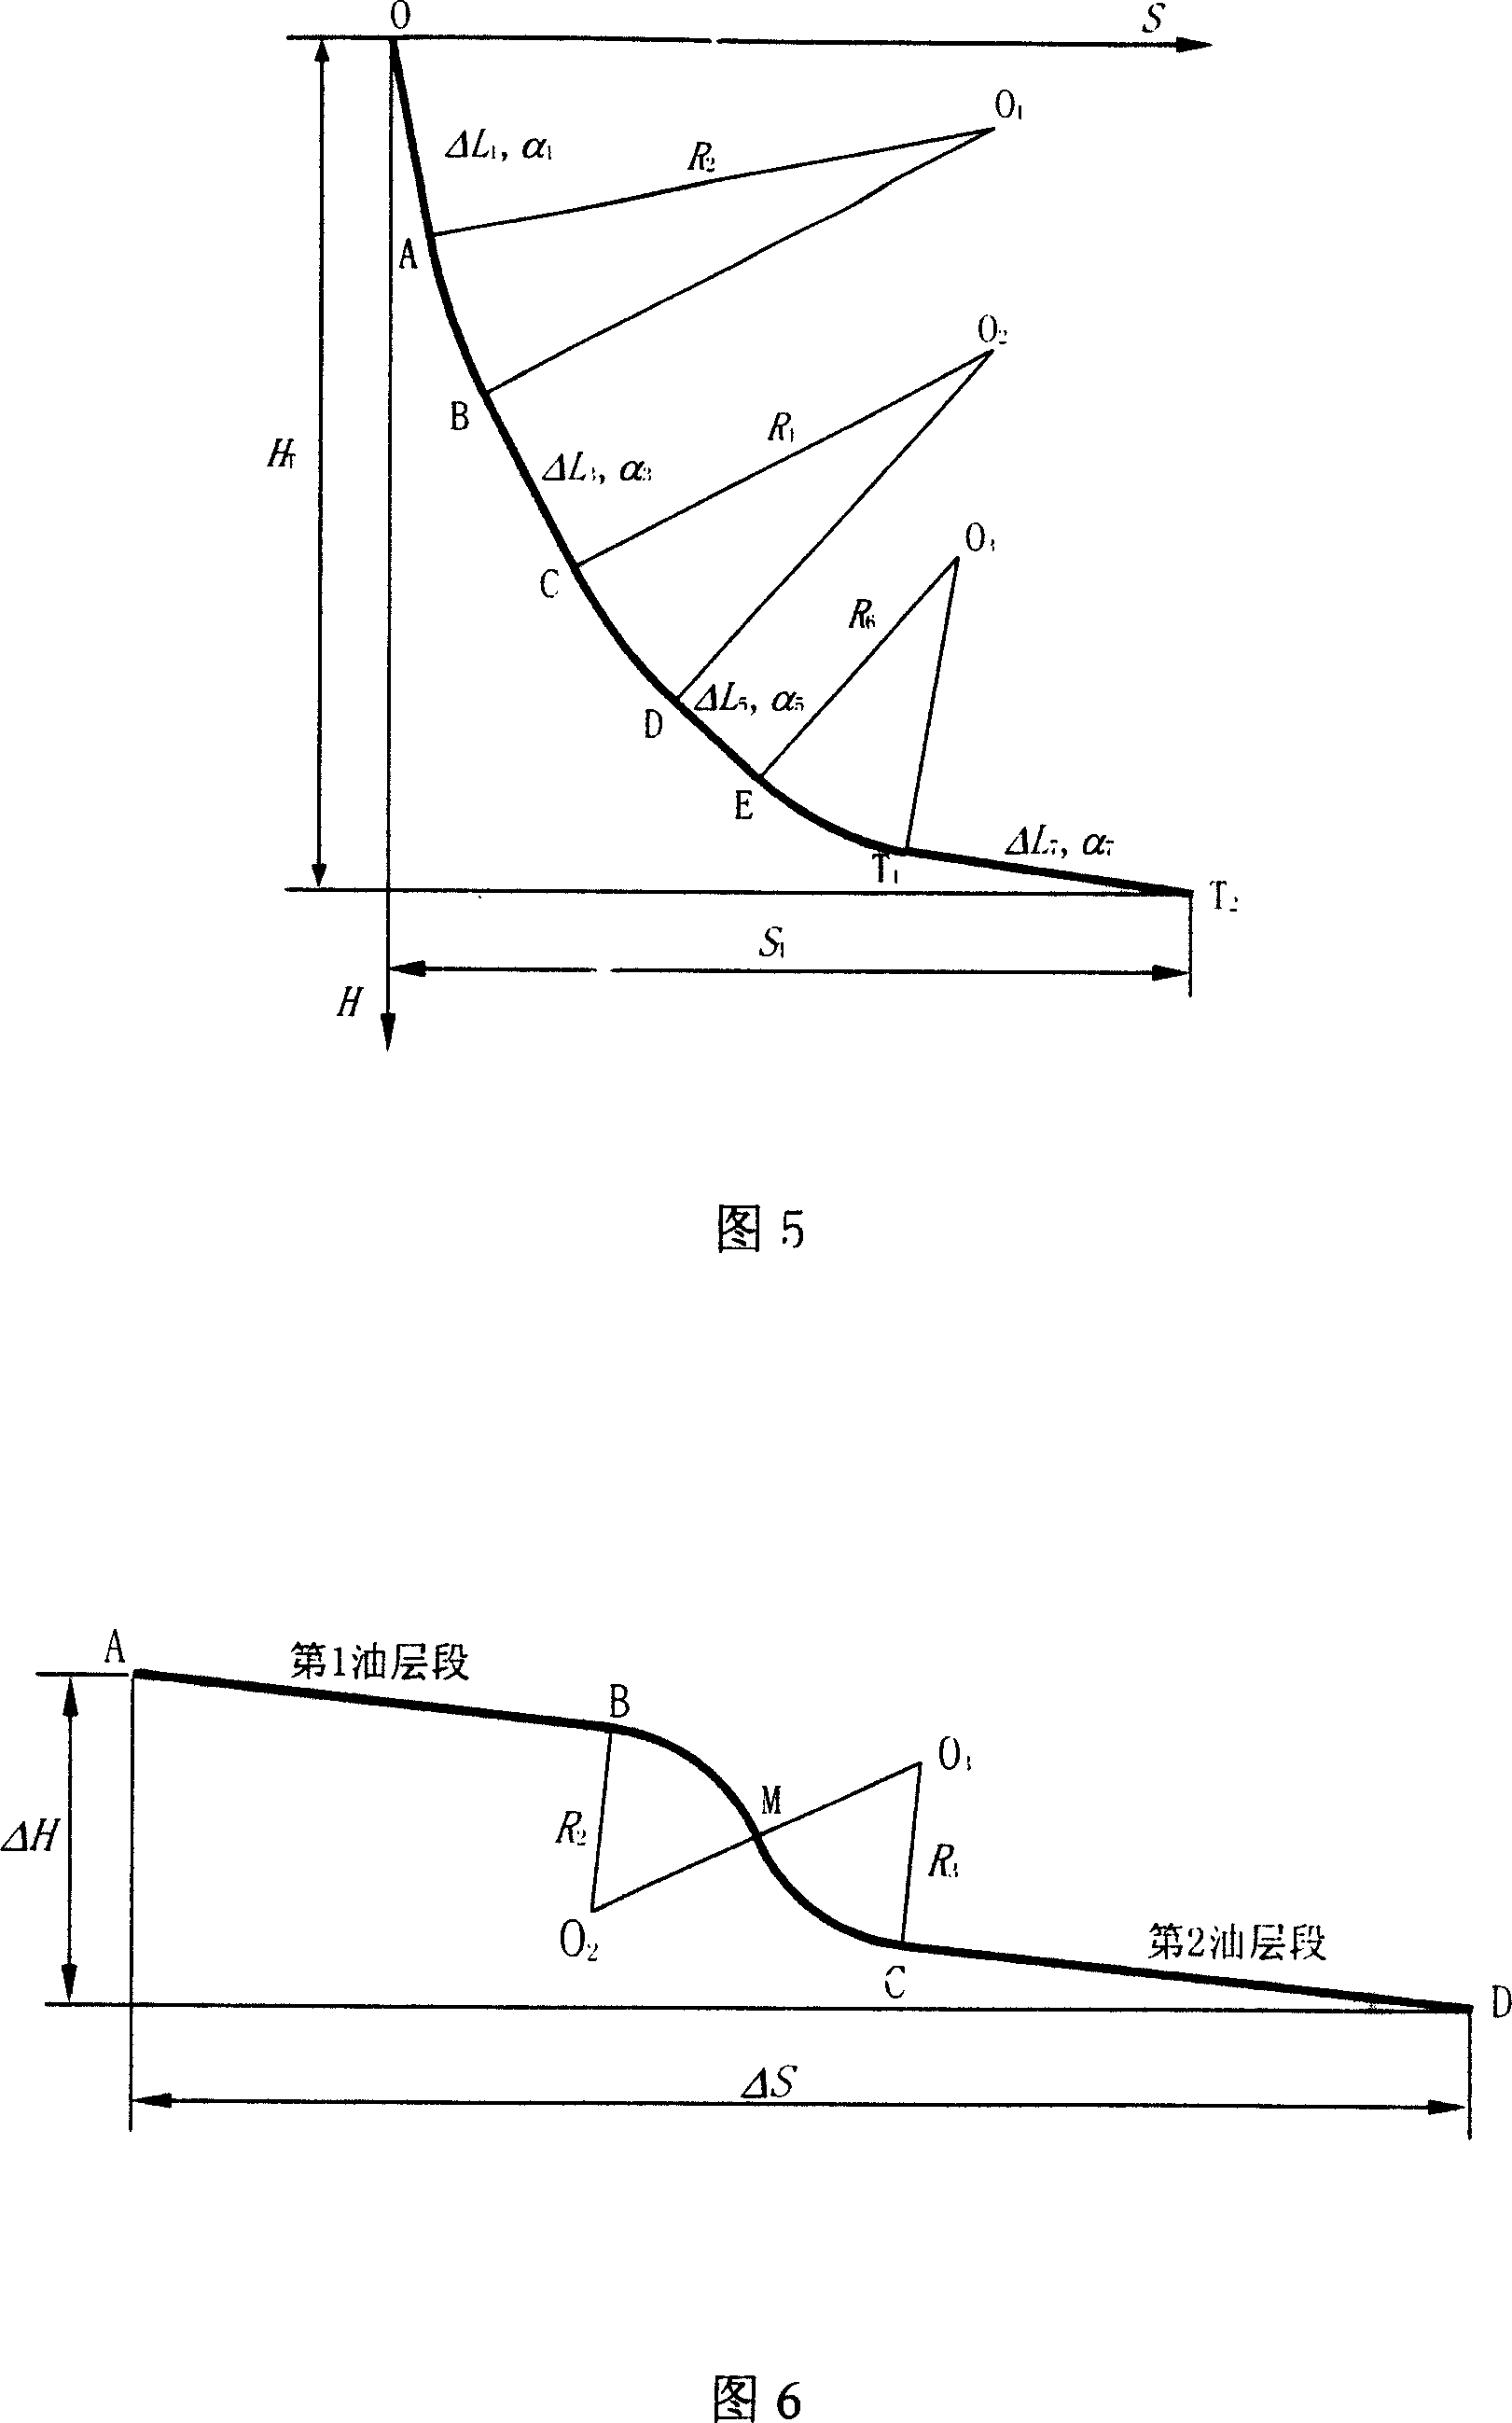 Method for designing well-drilling borehole track